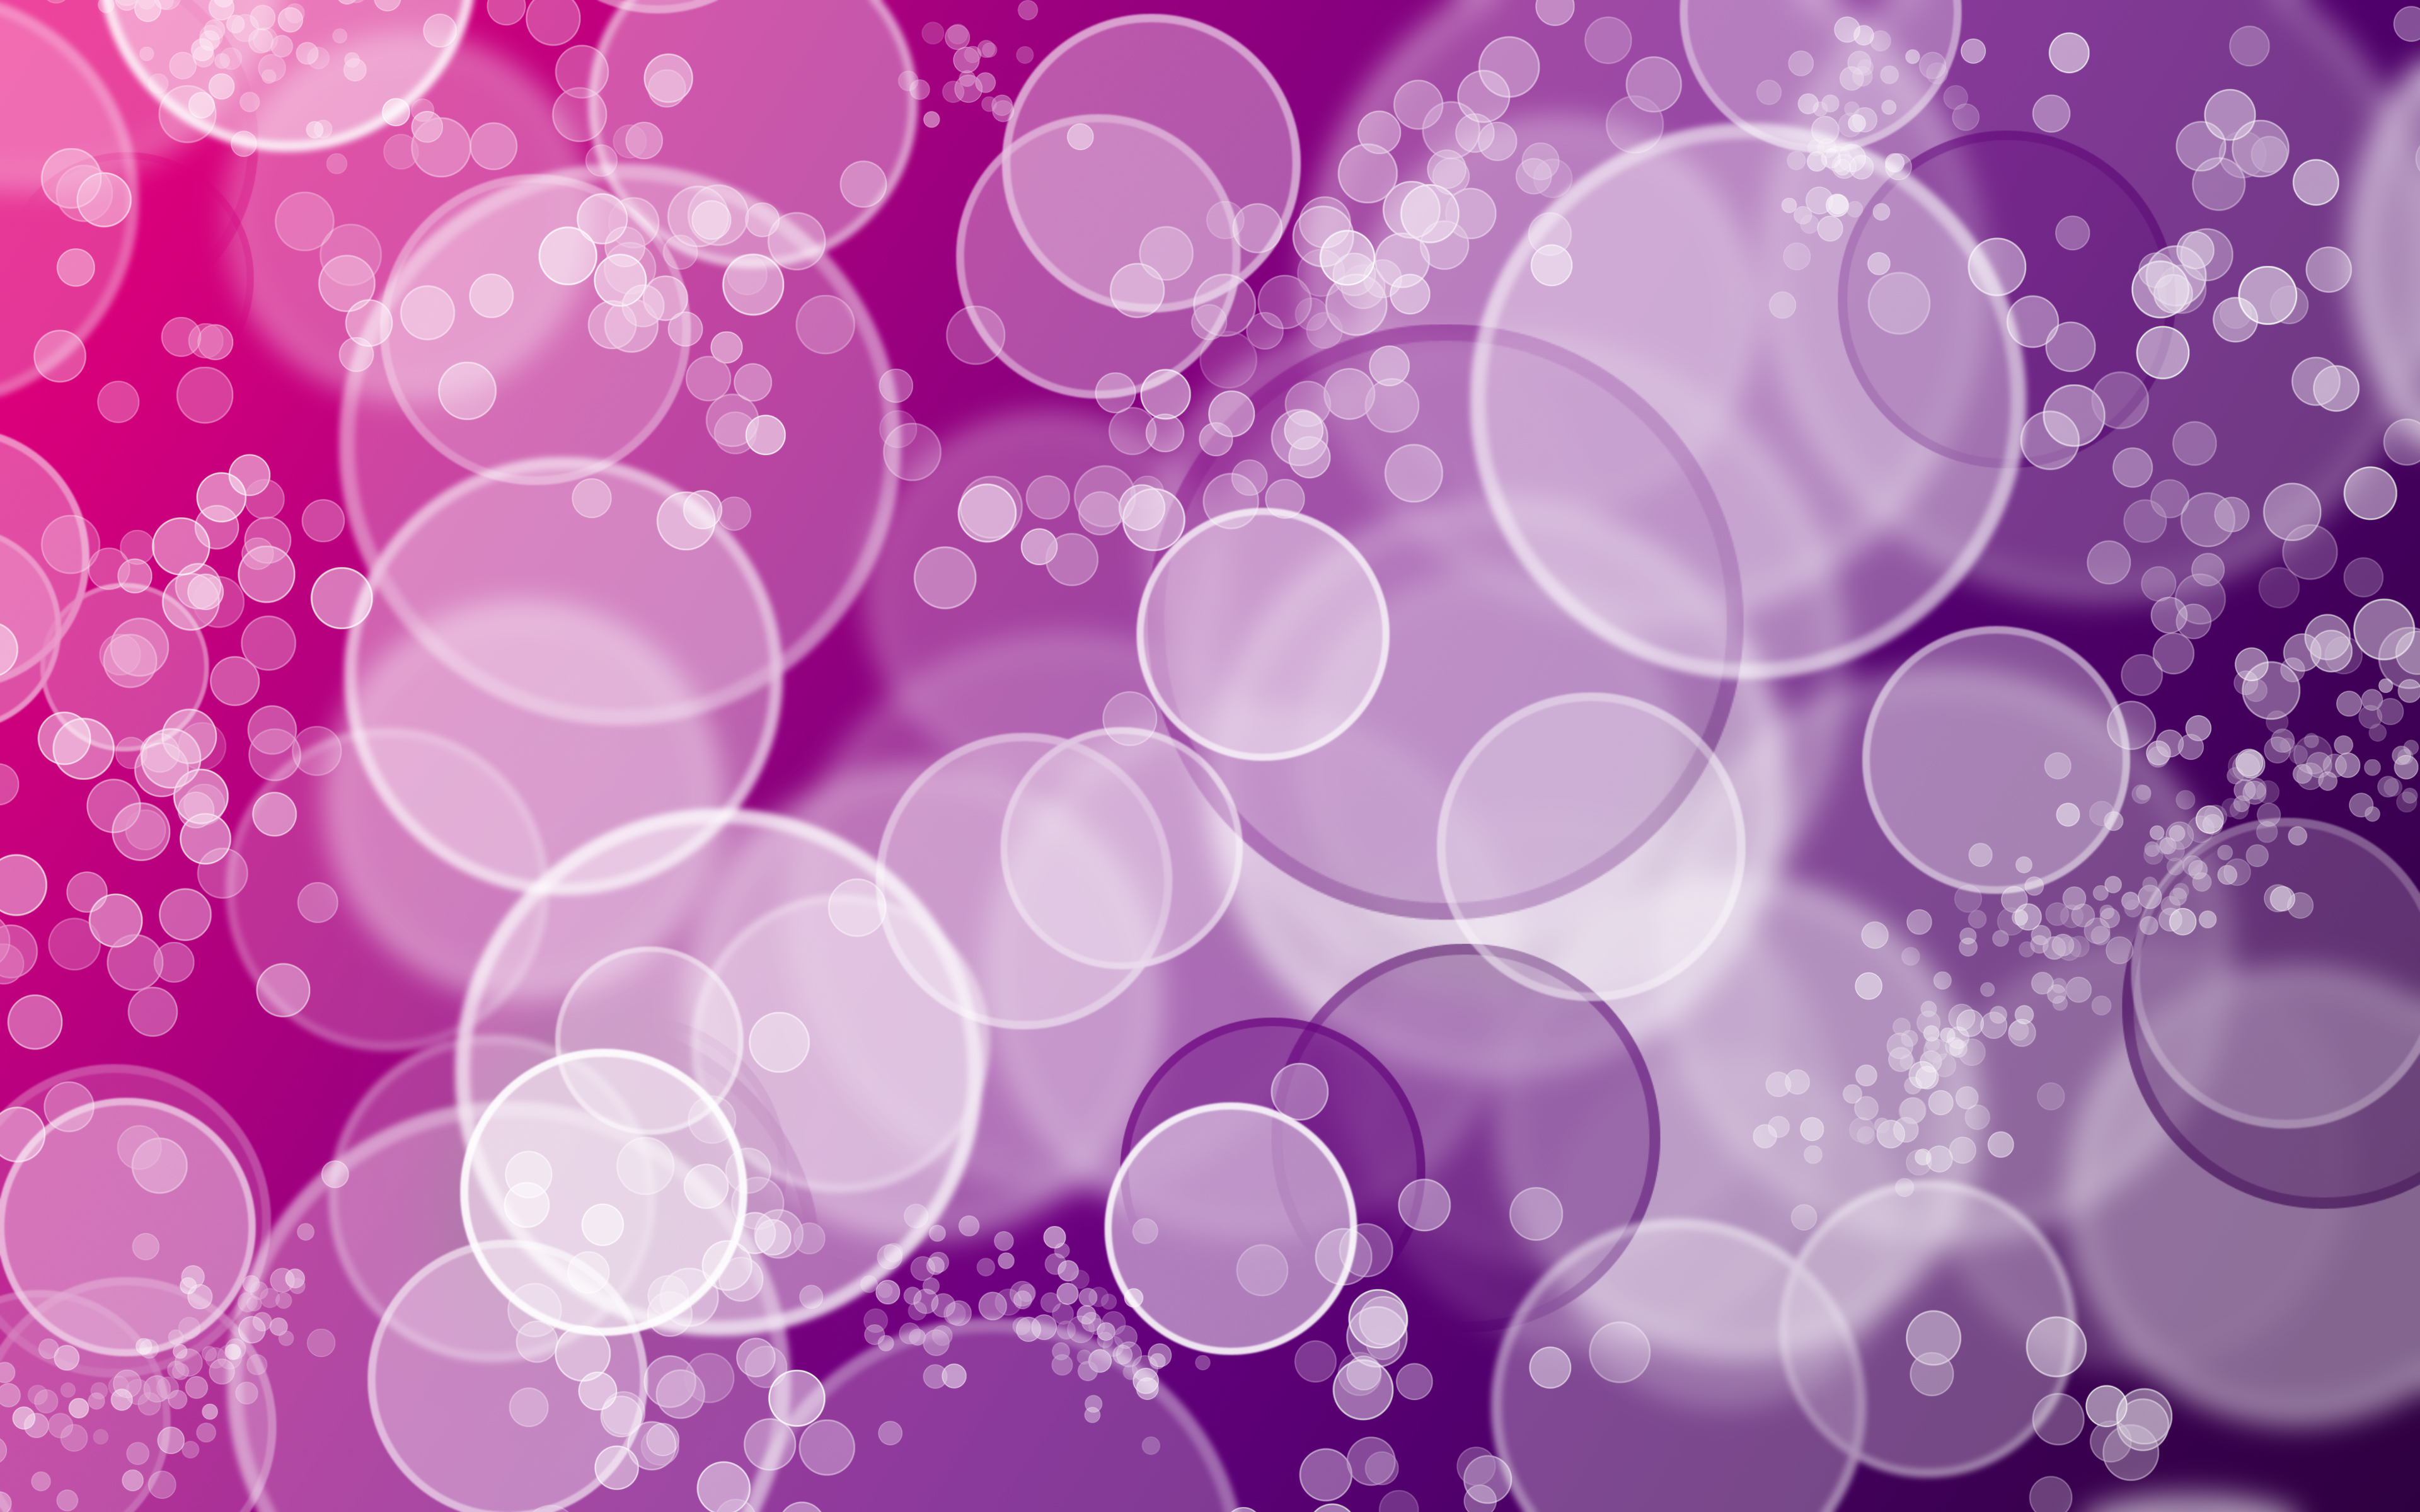 Pink And Purple Bubbles Background Image Picture For Life Congratulations HD Wallpaper